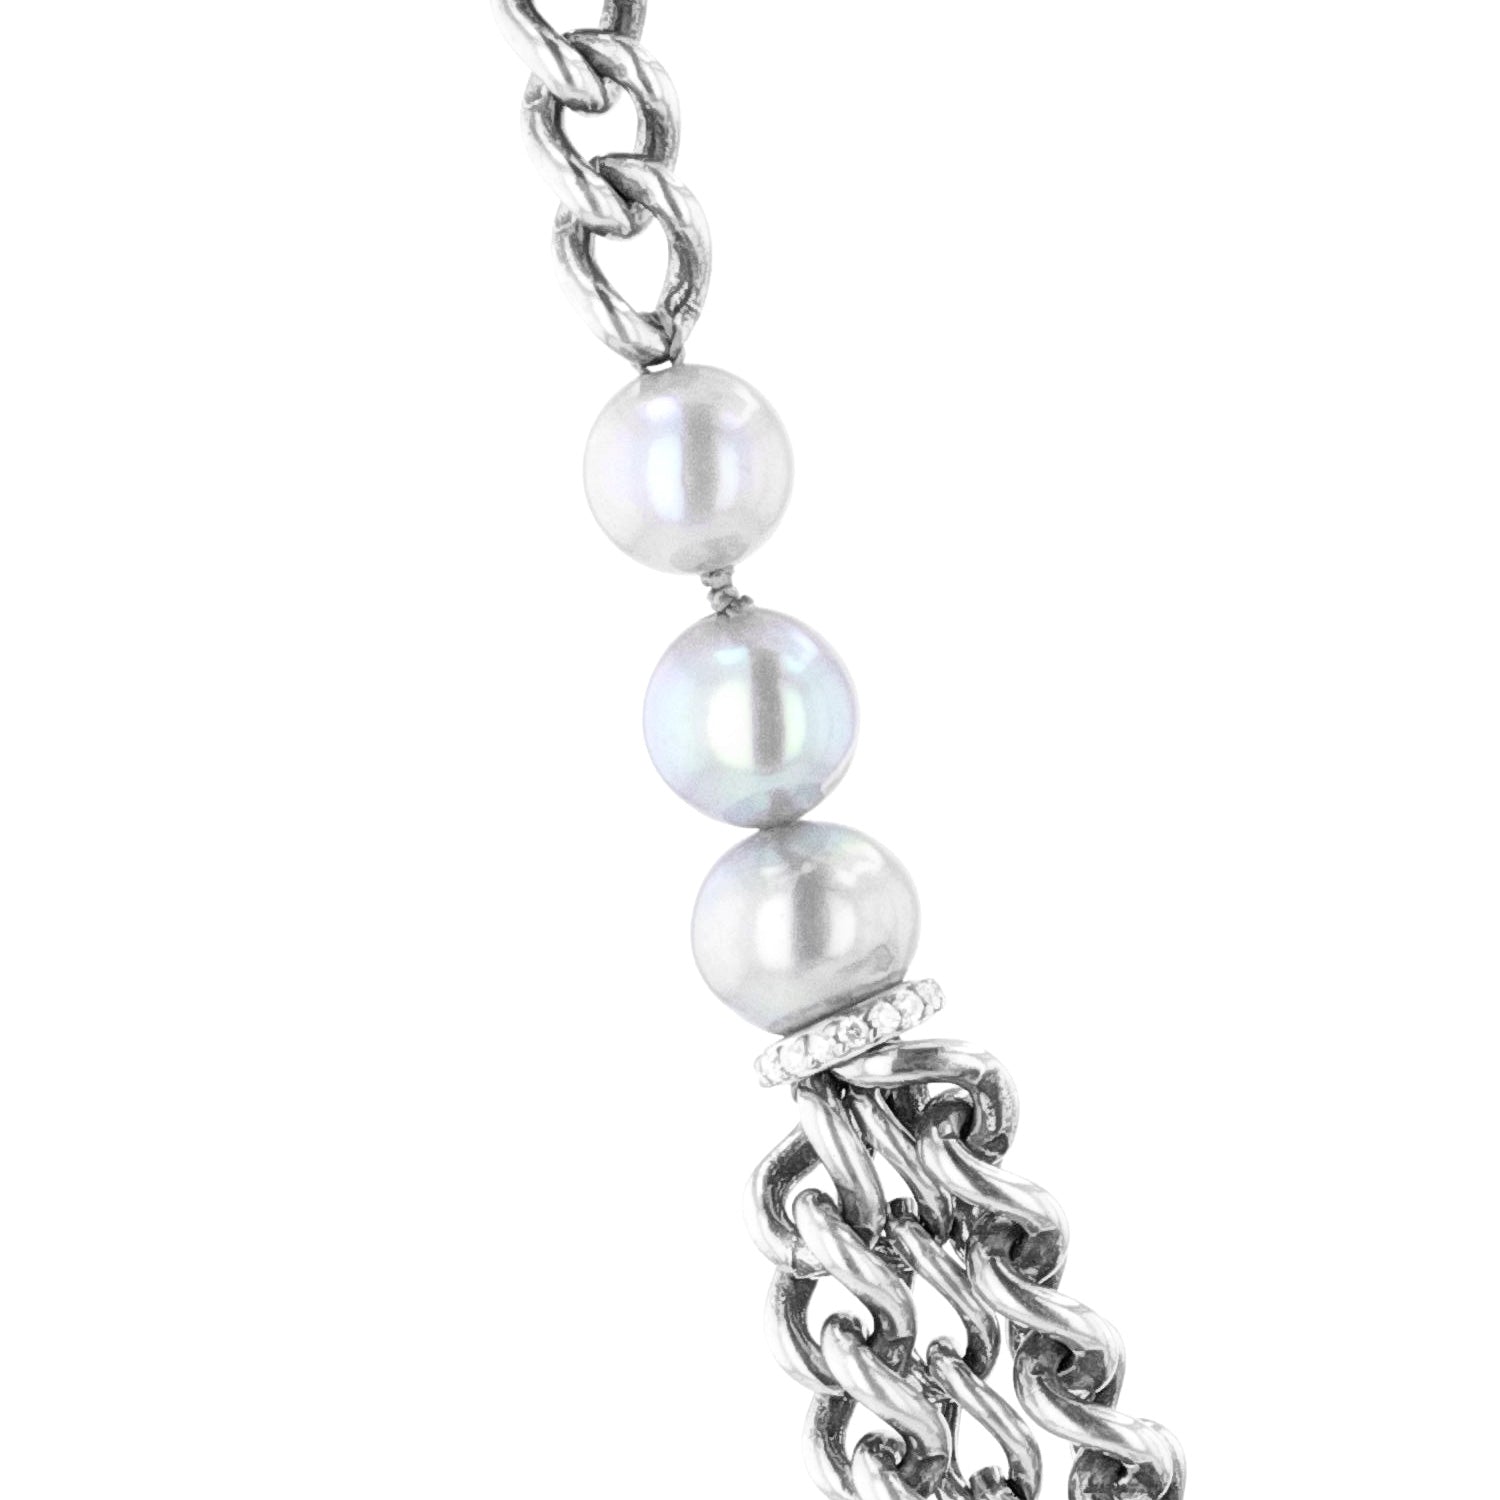 Triple Layer Curb Chain Necklace with Silver Pearls & Diamonds - 18 - 20"  N0003304 - TBird